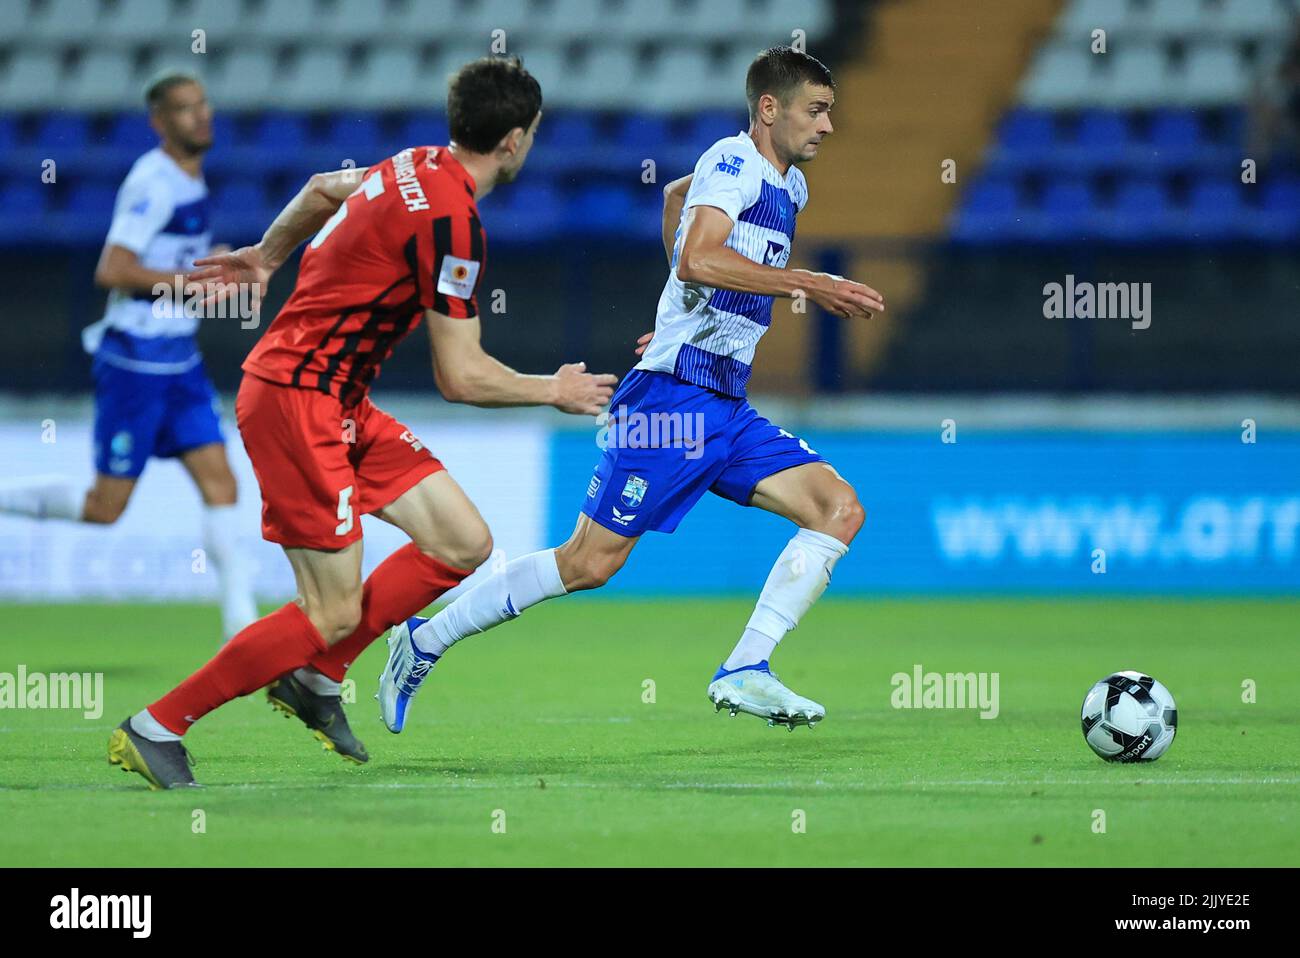 UEFA Europa Conference League Second qualifying round, 2nd leg match  between NK Osijek and FC Kyzylzhar